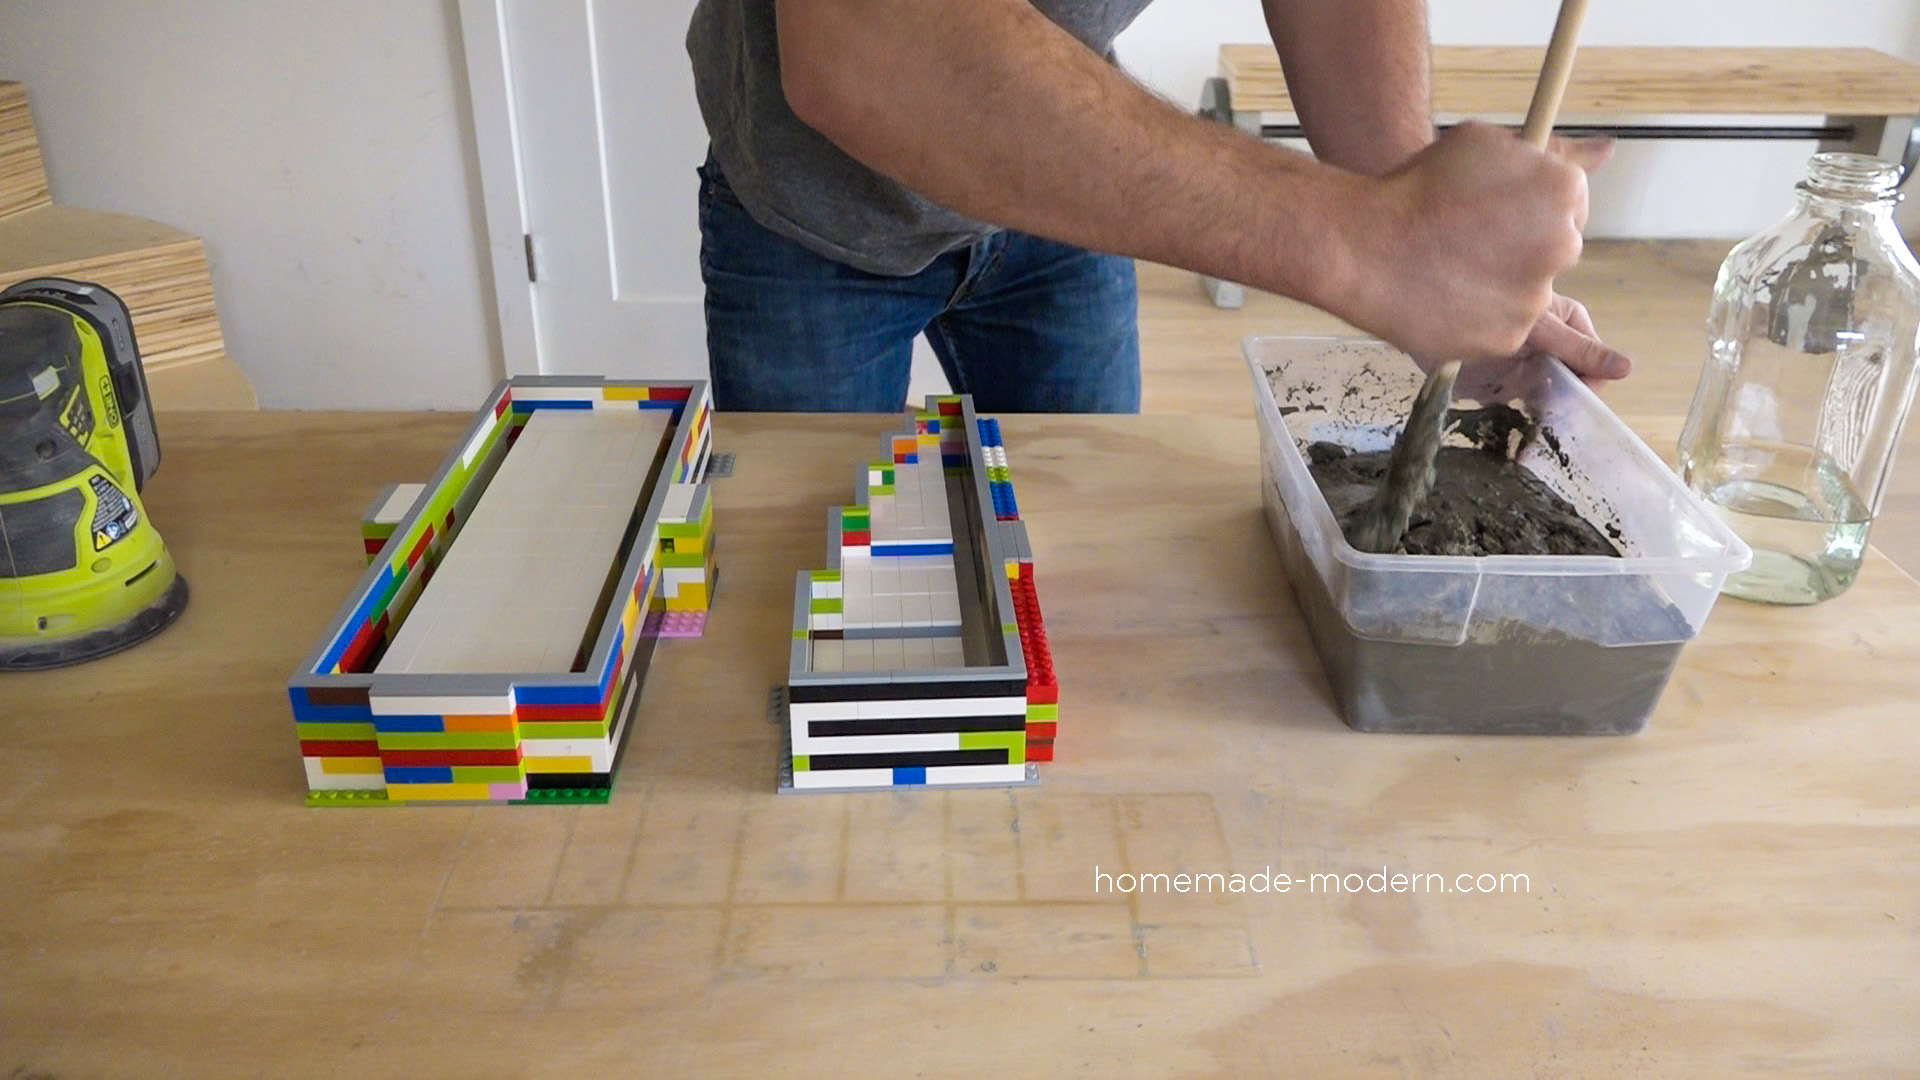 This DIY concrete backsplash was made using Lego bricks to form concrete. The Lego bricks were not damaged during this process. For more information on this project and on DIY concrete countertops go to HomeMade-Modern.com